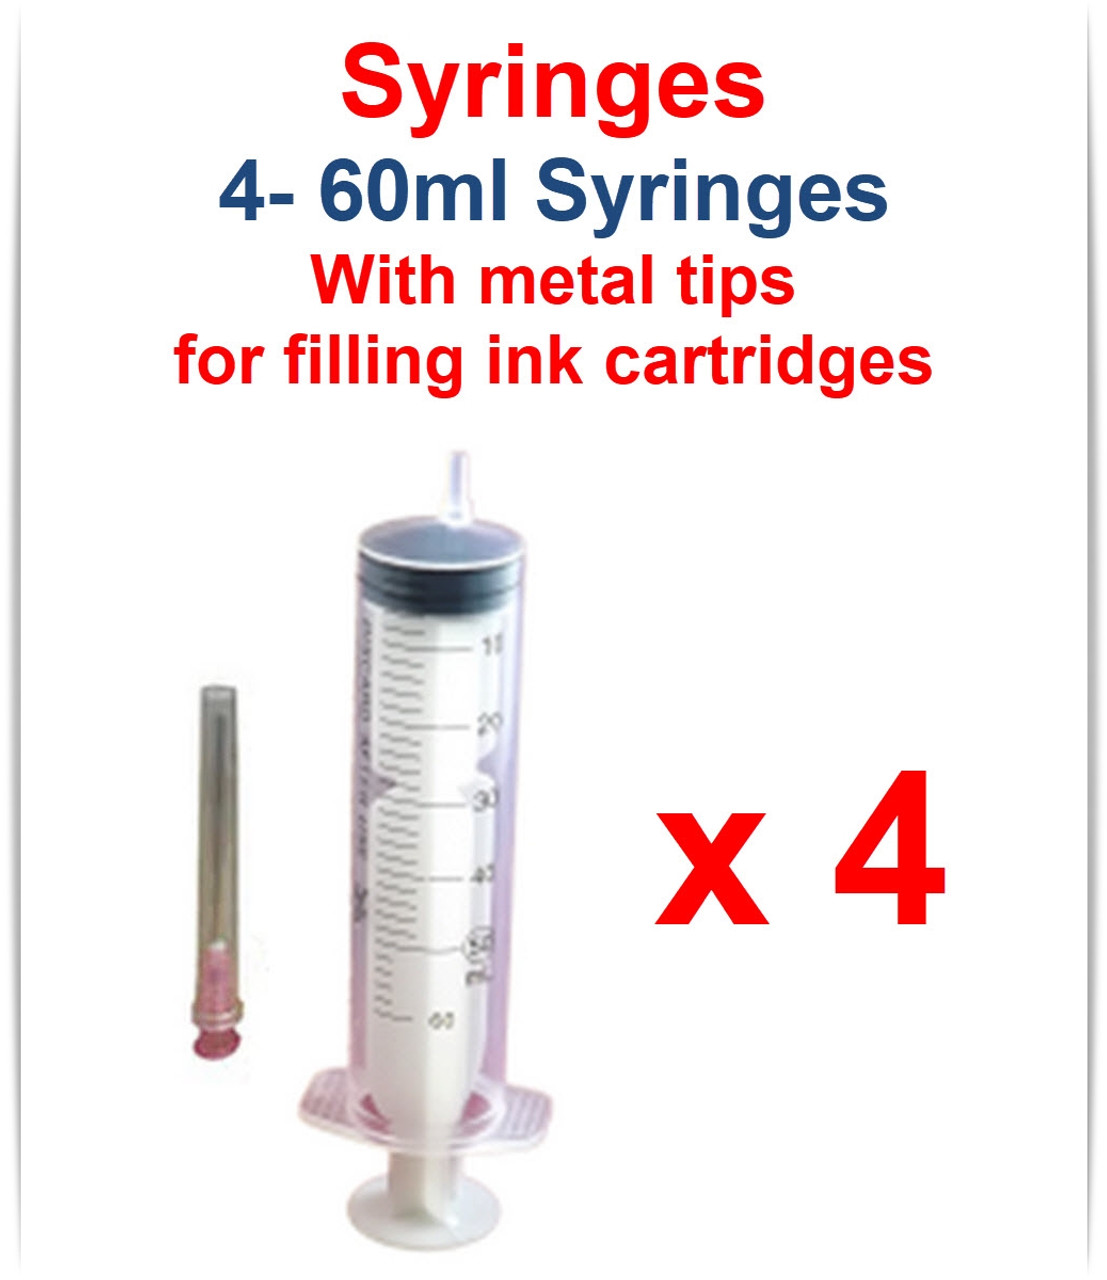 4- 60ml Syringes - Refillable Cartridge filling Syringe with metal tips